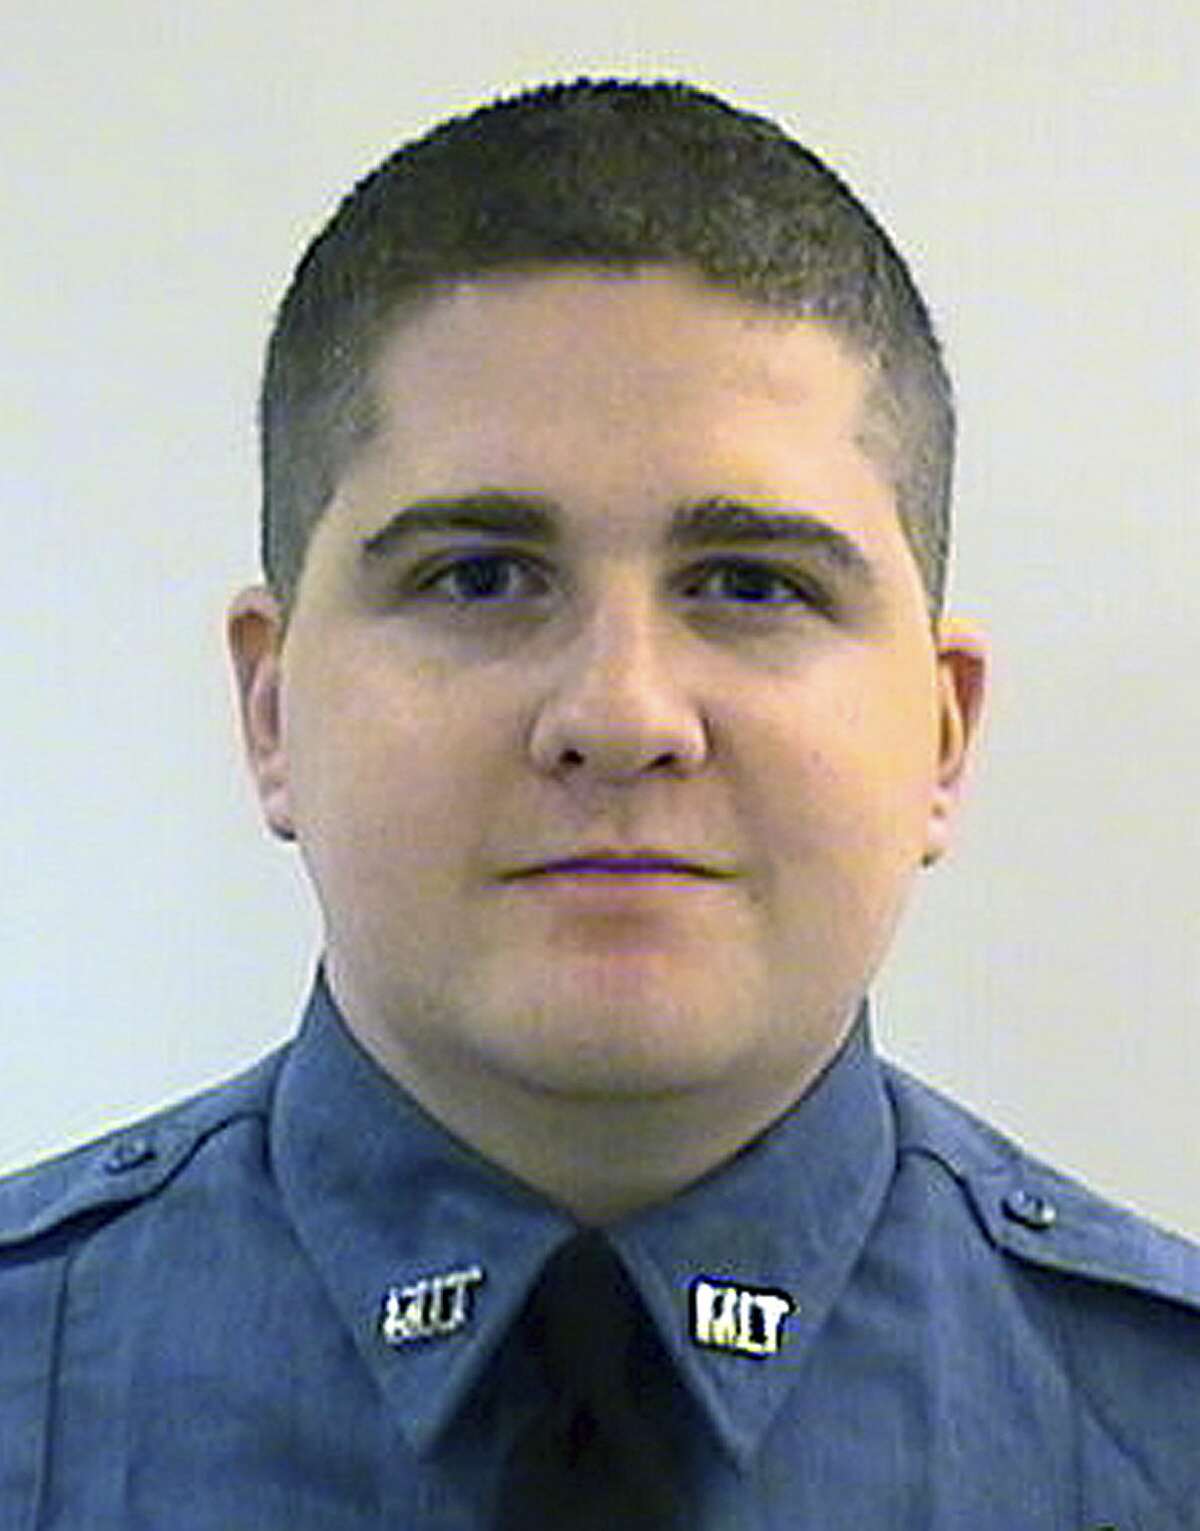 FILE - This undated file photo released by the Middlesex District Attorney’s Office shows Massachusetts Institute of Technology Police Officer Sean Collier, of Somerville, Mass. Investigators said Collier was shot to death Thursday, April 18, 2013 on the school’s campus in Cambridge, Mass., by Boston Marathon bombing suspects Tamerlan and Dzhokhar Tsarnaev in a botched attempt to obtain his gun several days after the twin explosions. During testimony Wednesday, March 11, 2015, in the federal death penalty trial in Boston of Dzhokhar Tsarnaev, MIT Police Chief John DiFava testified he told Collier to “be safe” about an hour before he was shot dead. Prosecutors said the Tsarnaev brothers killed Collier during an unsuccessful attempt to steal his gun. Dzhokhar Tsarnaev’s lawyer said during opening statements that it was Tamerlan Tsarnaev who shot Collier.